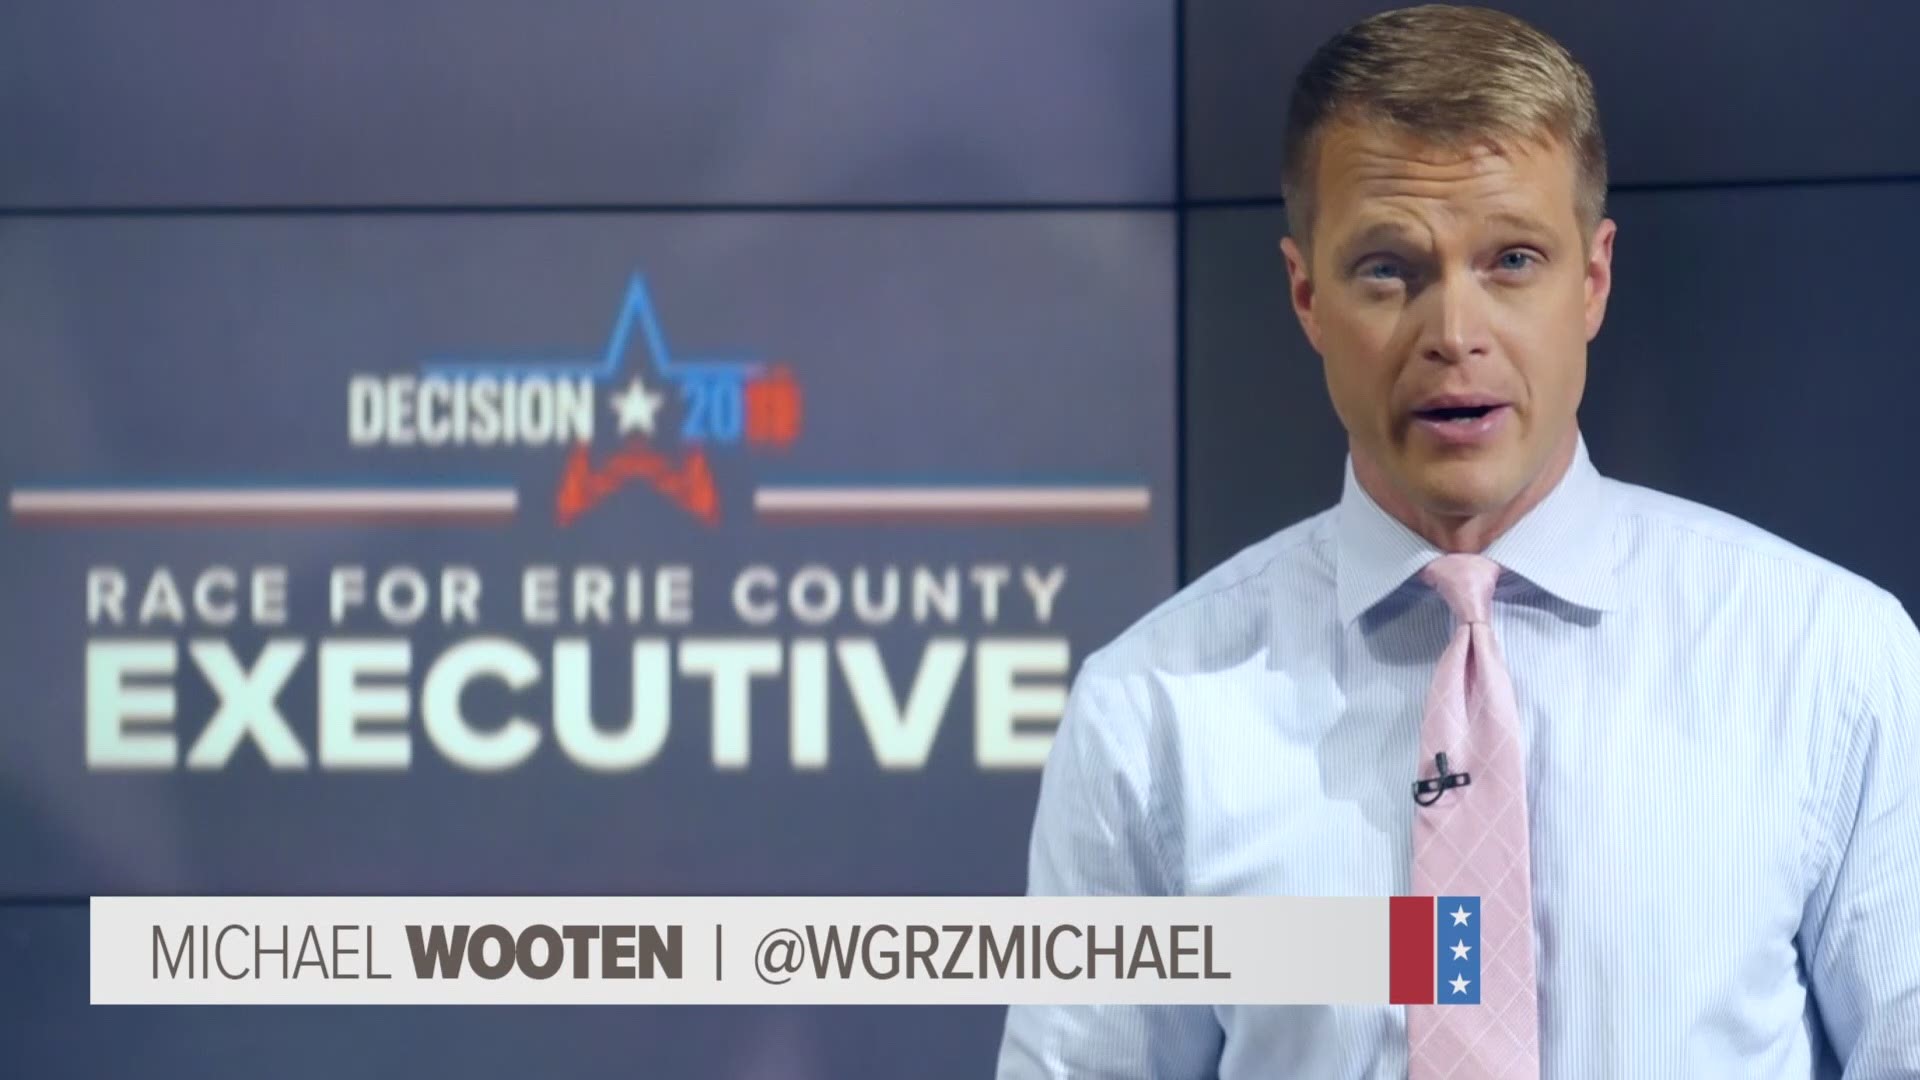 Michael Wooten looks at two big issues that are sure to be discussed during the Erie County Executive debate.